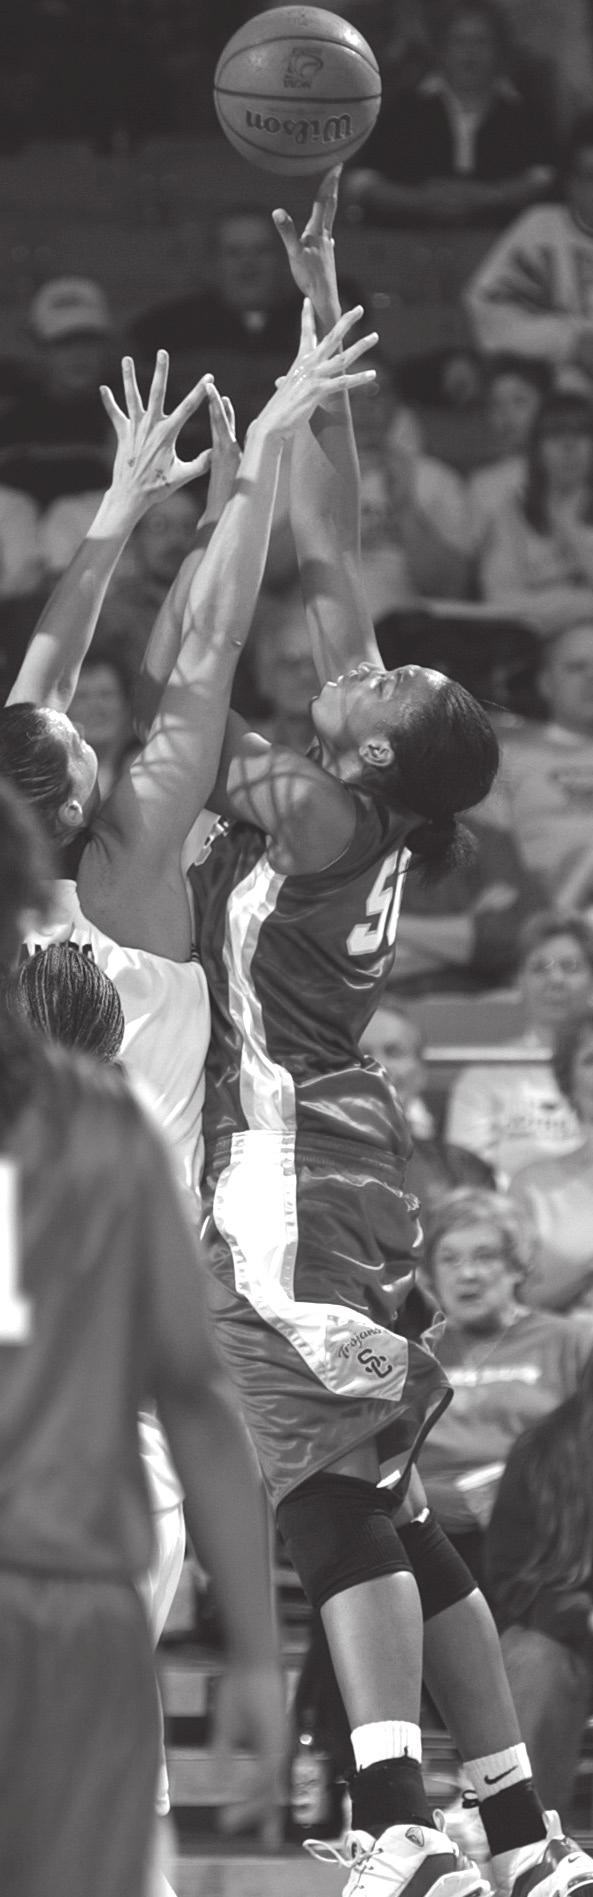 2006-07 OMEN OF TROY 2005-06 Season Outlook This is an awesome senior class, Trakh said. This class has turned this program around along with past seniors Kim Gipson, Rachel oodward and Meghan Gnekow.